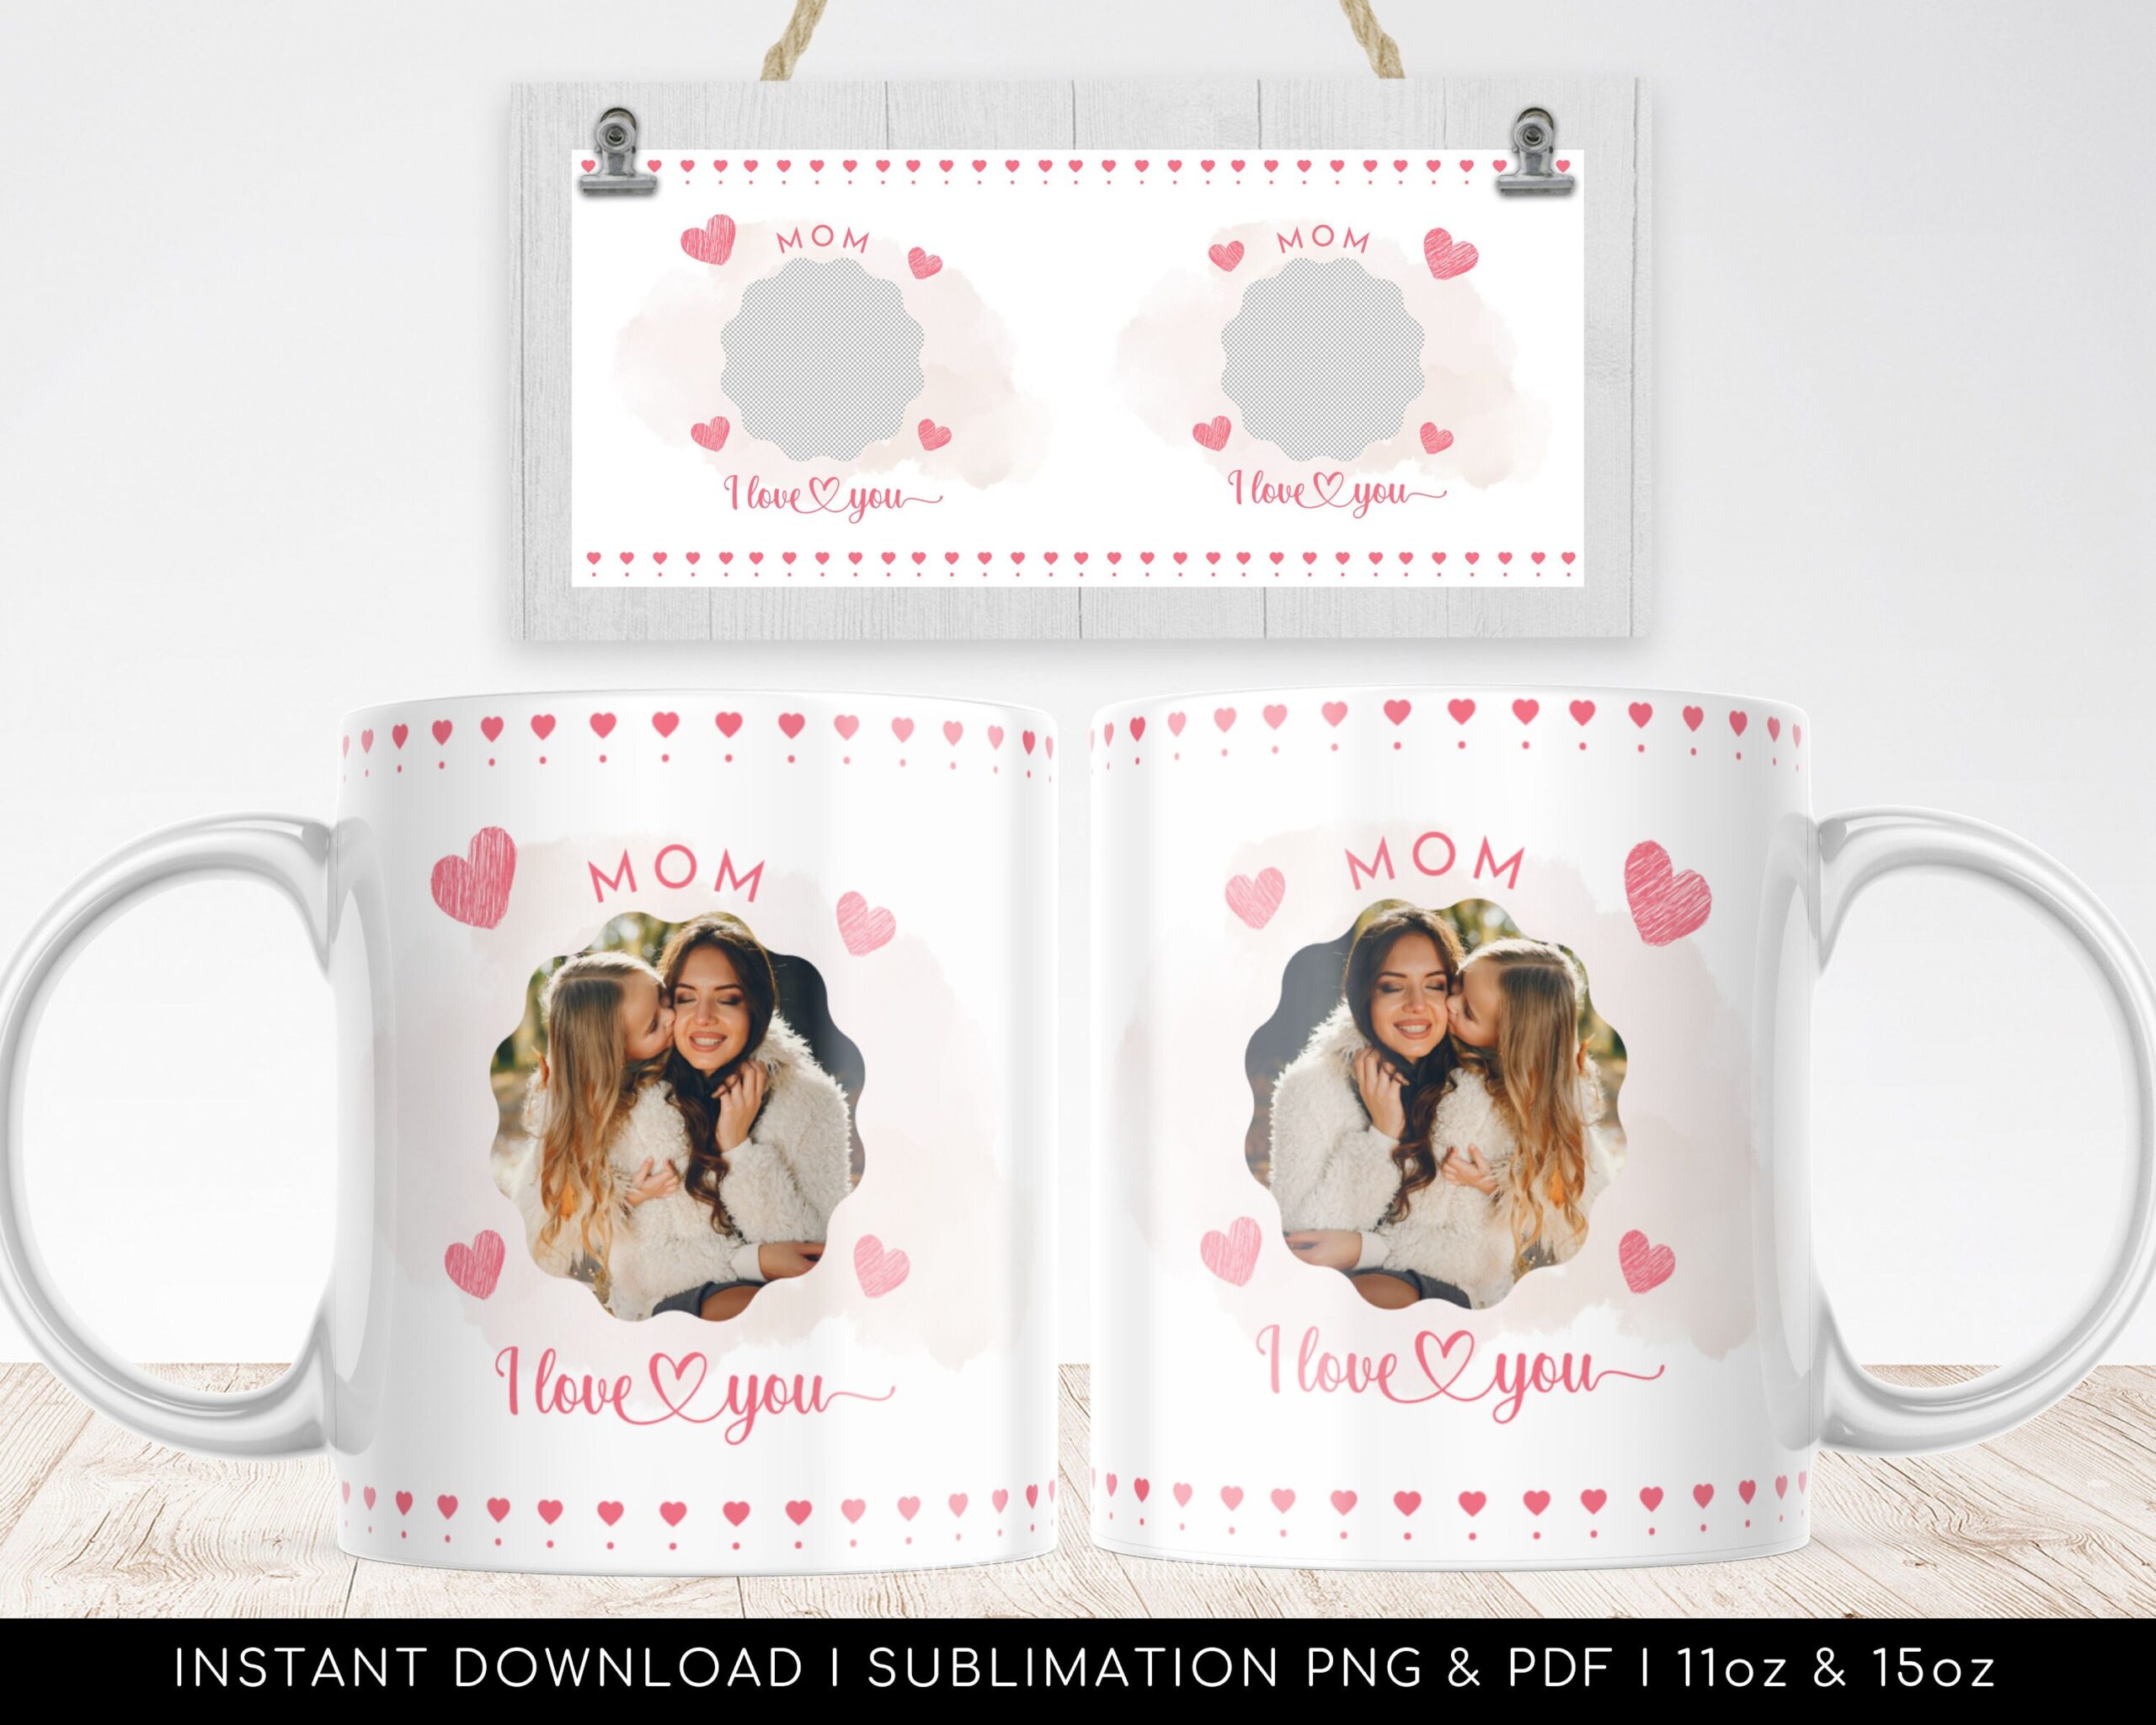 Mom I Love You Photo Mug PNG - Heart Watercolor Pattern Design. Coffee Mug Wrap Transfers 11oz | 15oz, Sublimation PNG - Instant Download